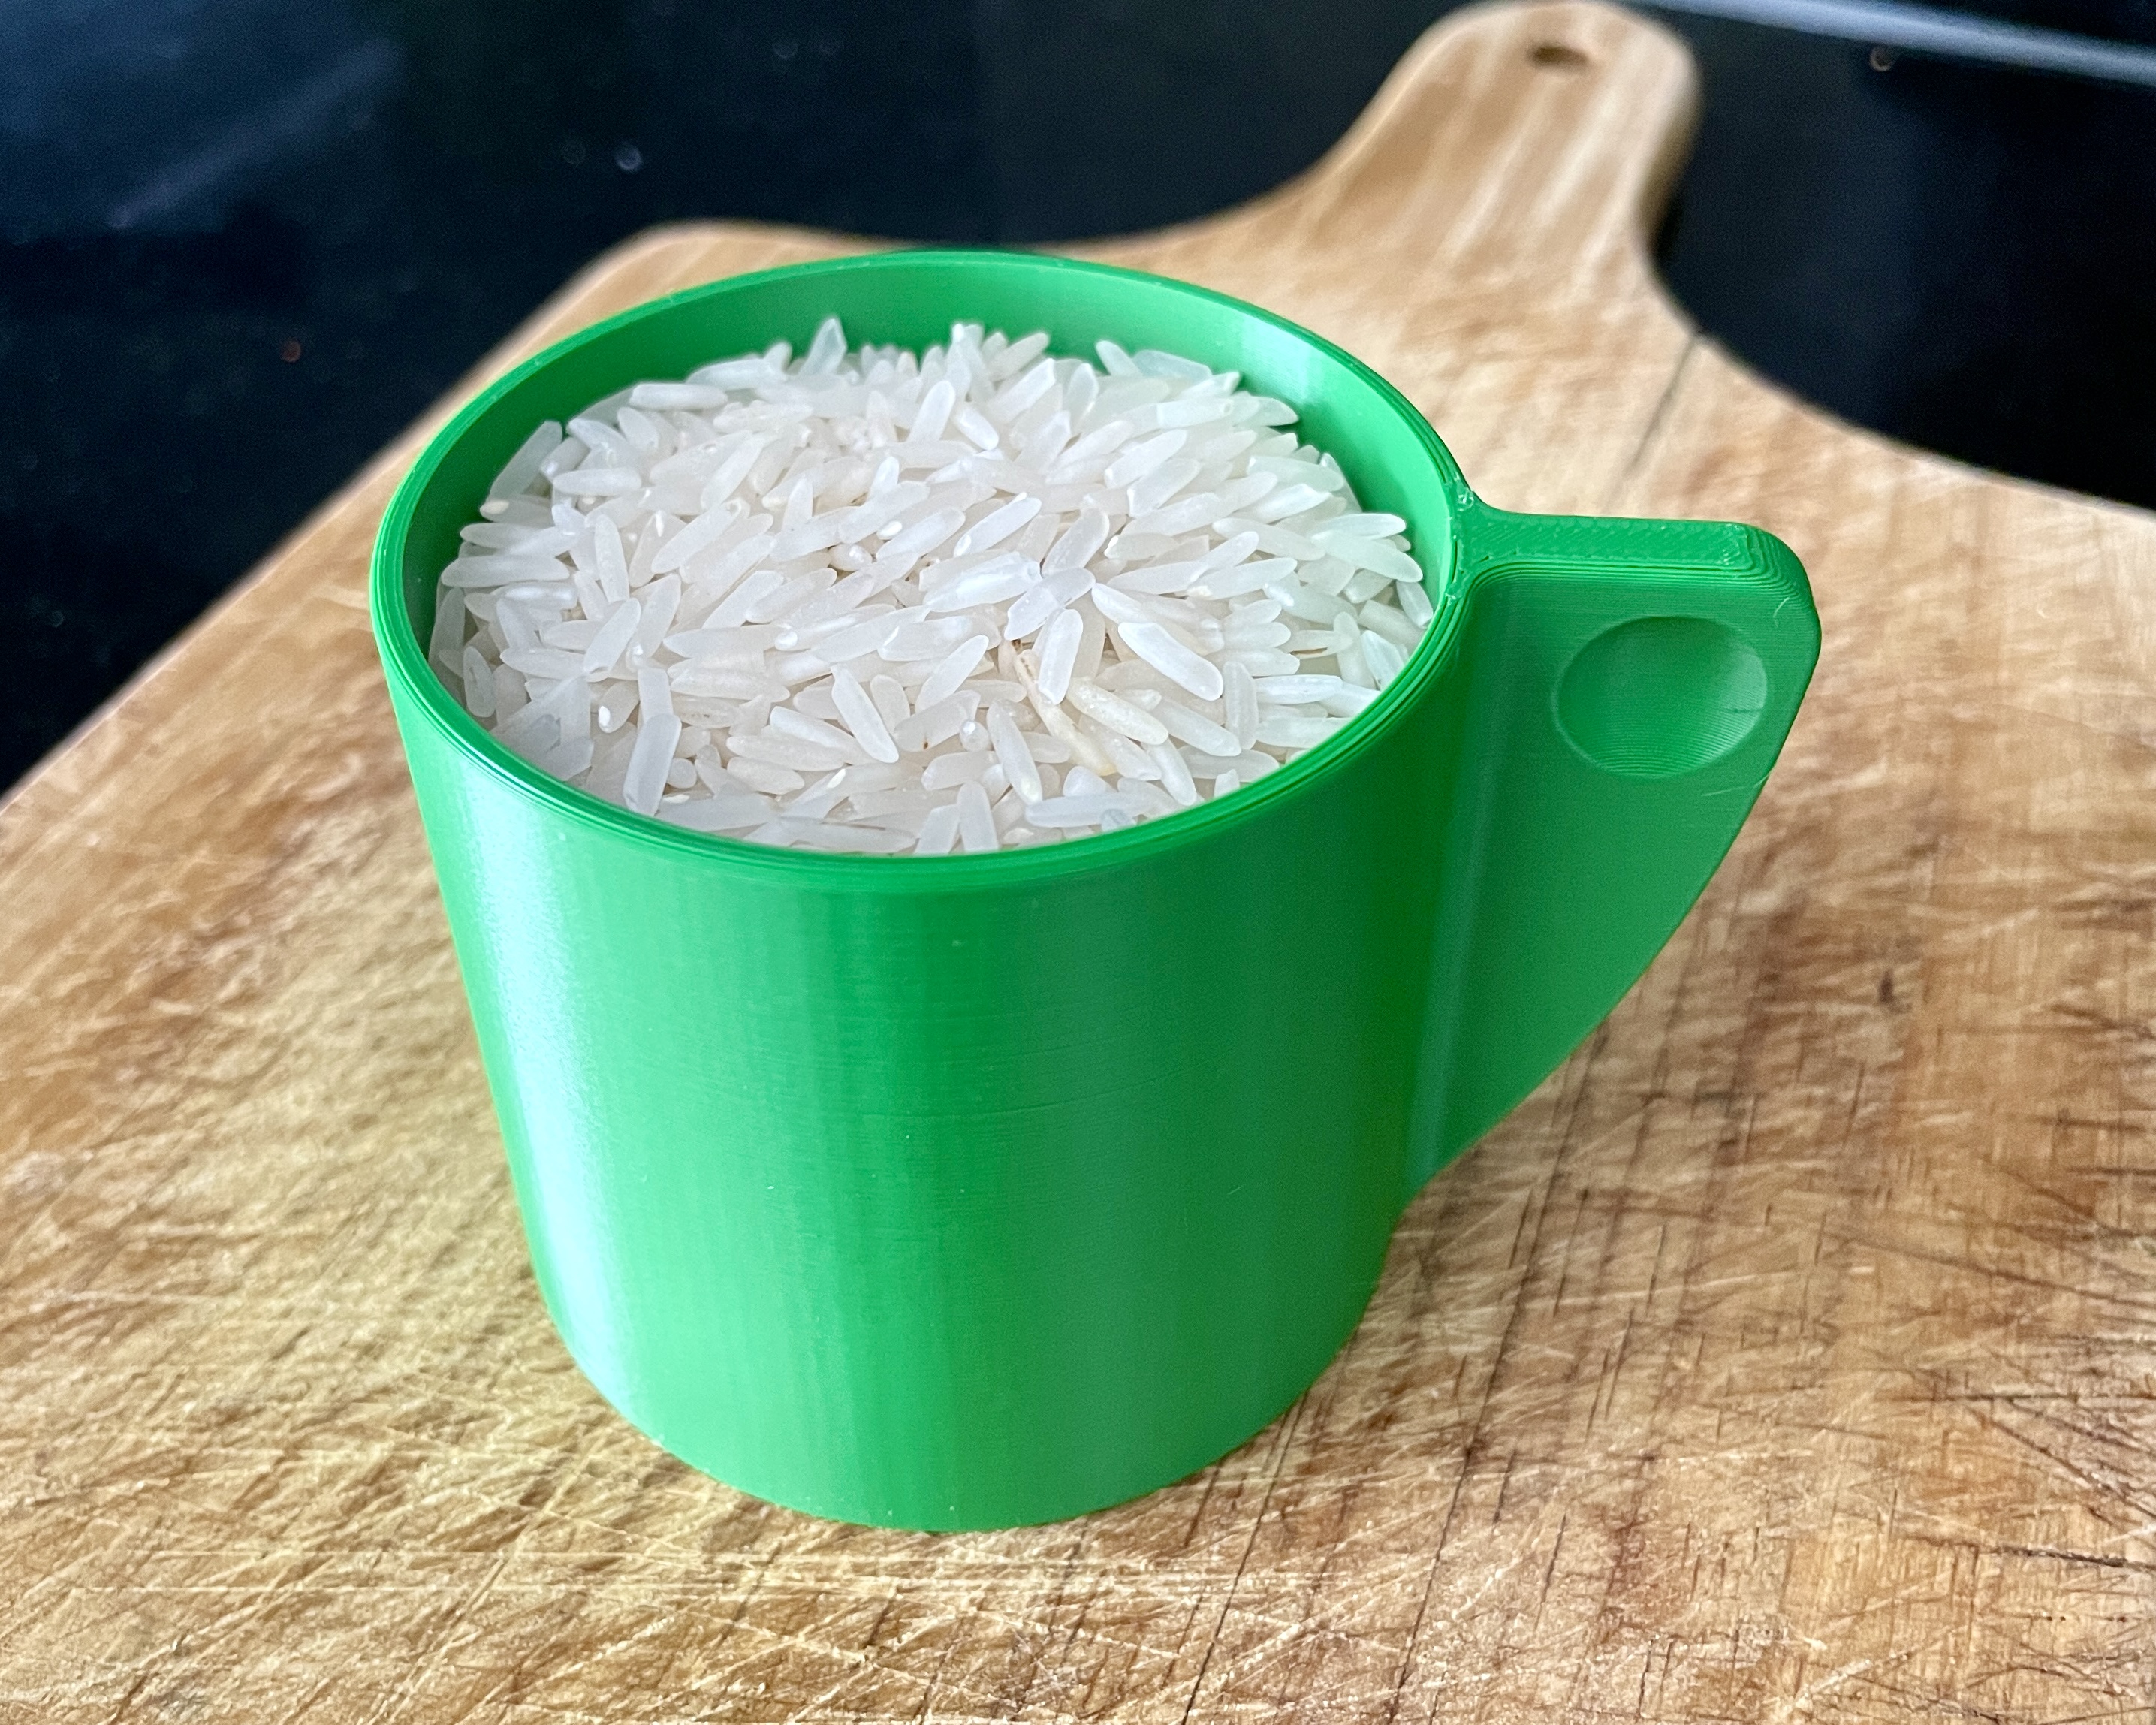 Rice measuring cup by Christian Englmeier